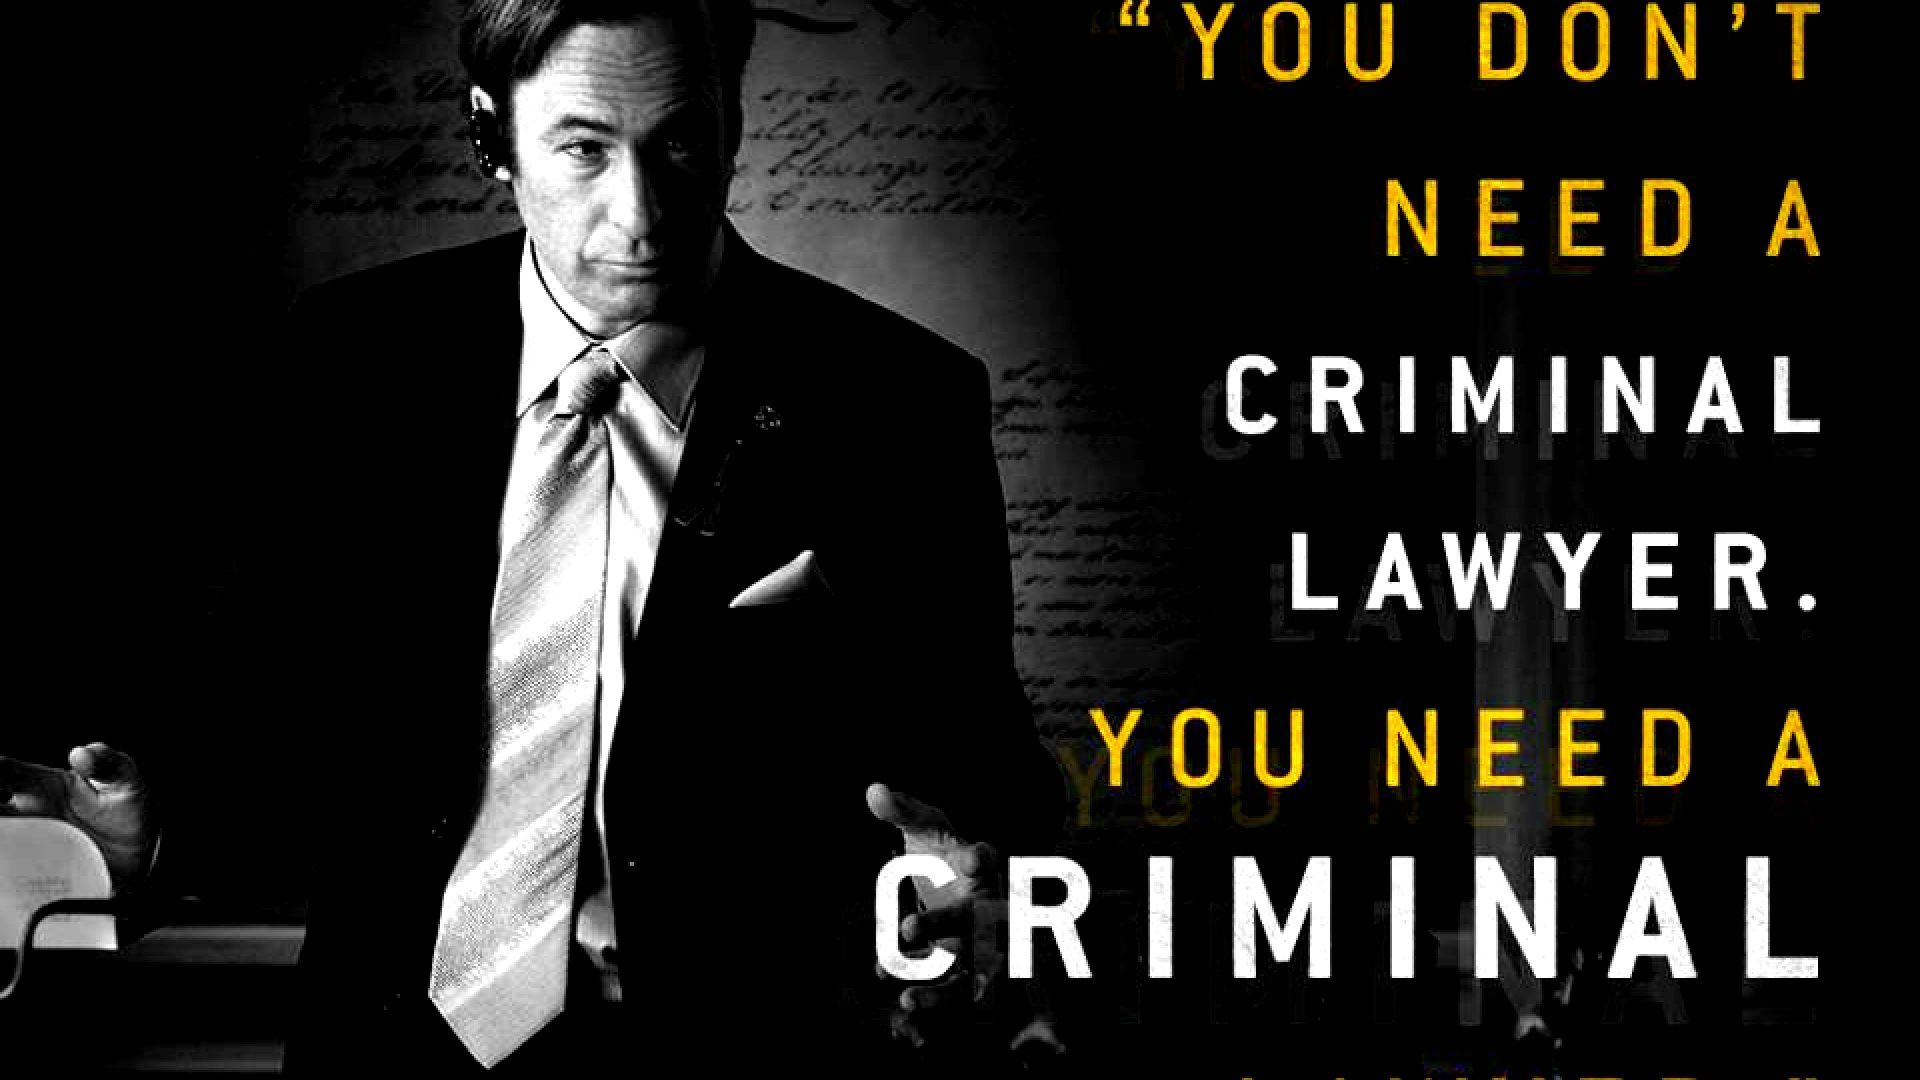 better call saul, Comedy, Drama, Series, Crime, Better, Call, Saul, Breaking Wallpaper HD / Desktop and Mobile Background